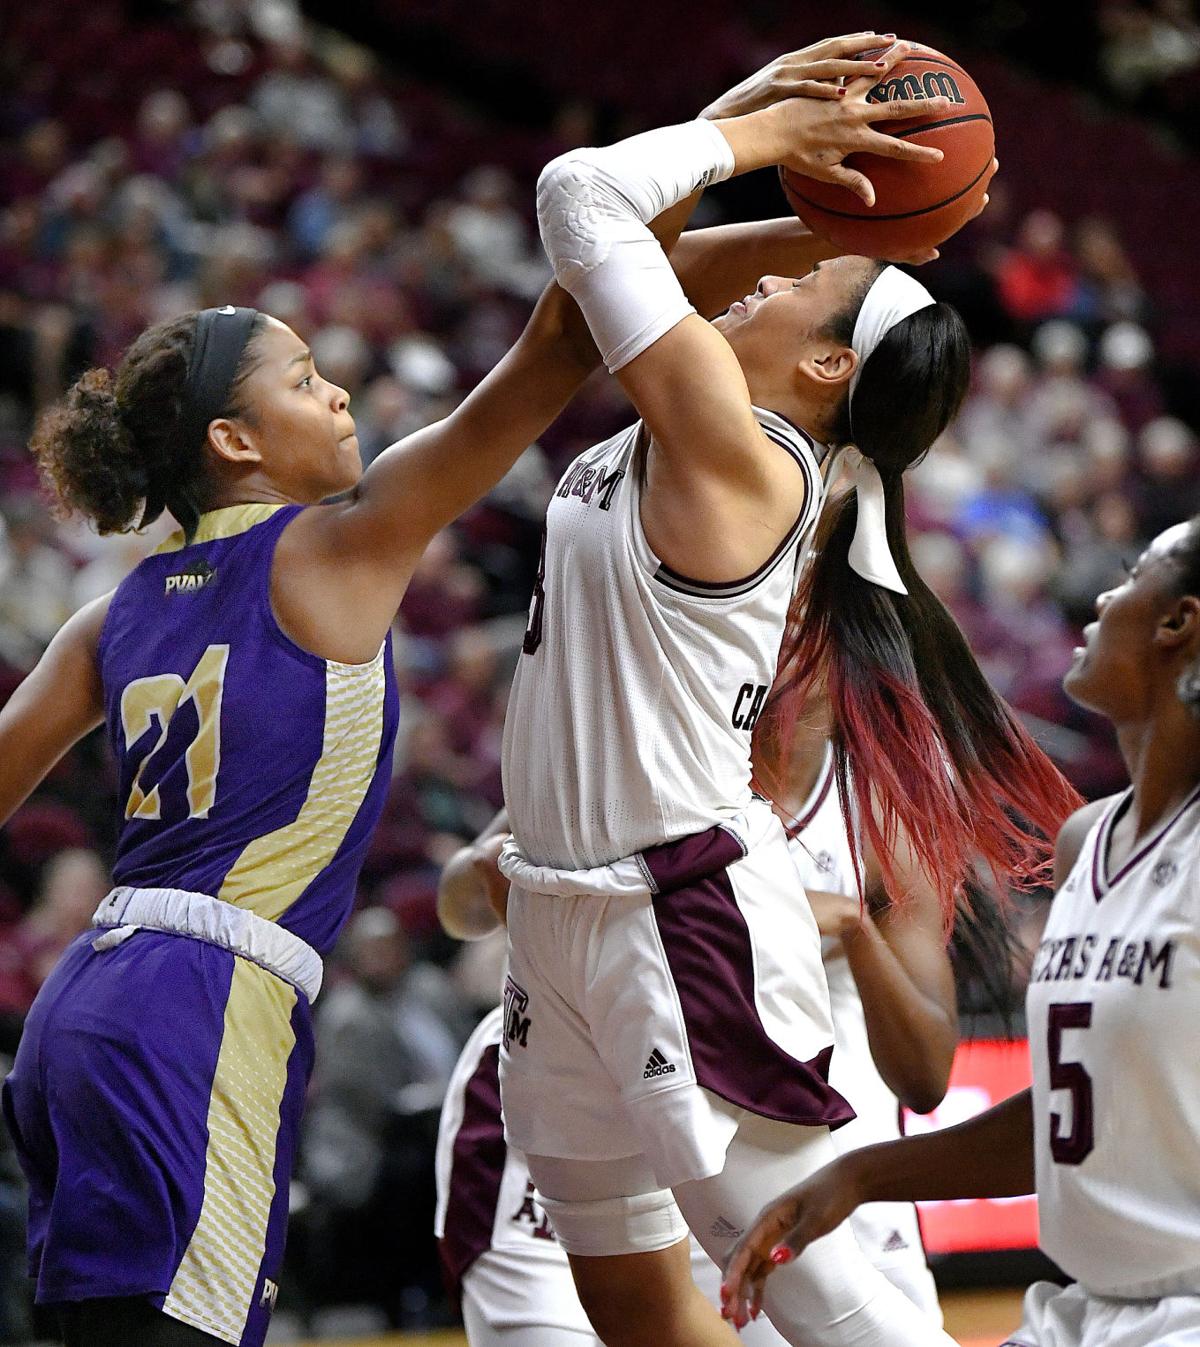 Aggie women's basketball team defeats Lady Panthers 98-70 | Women's ...